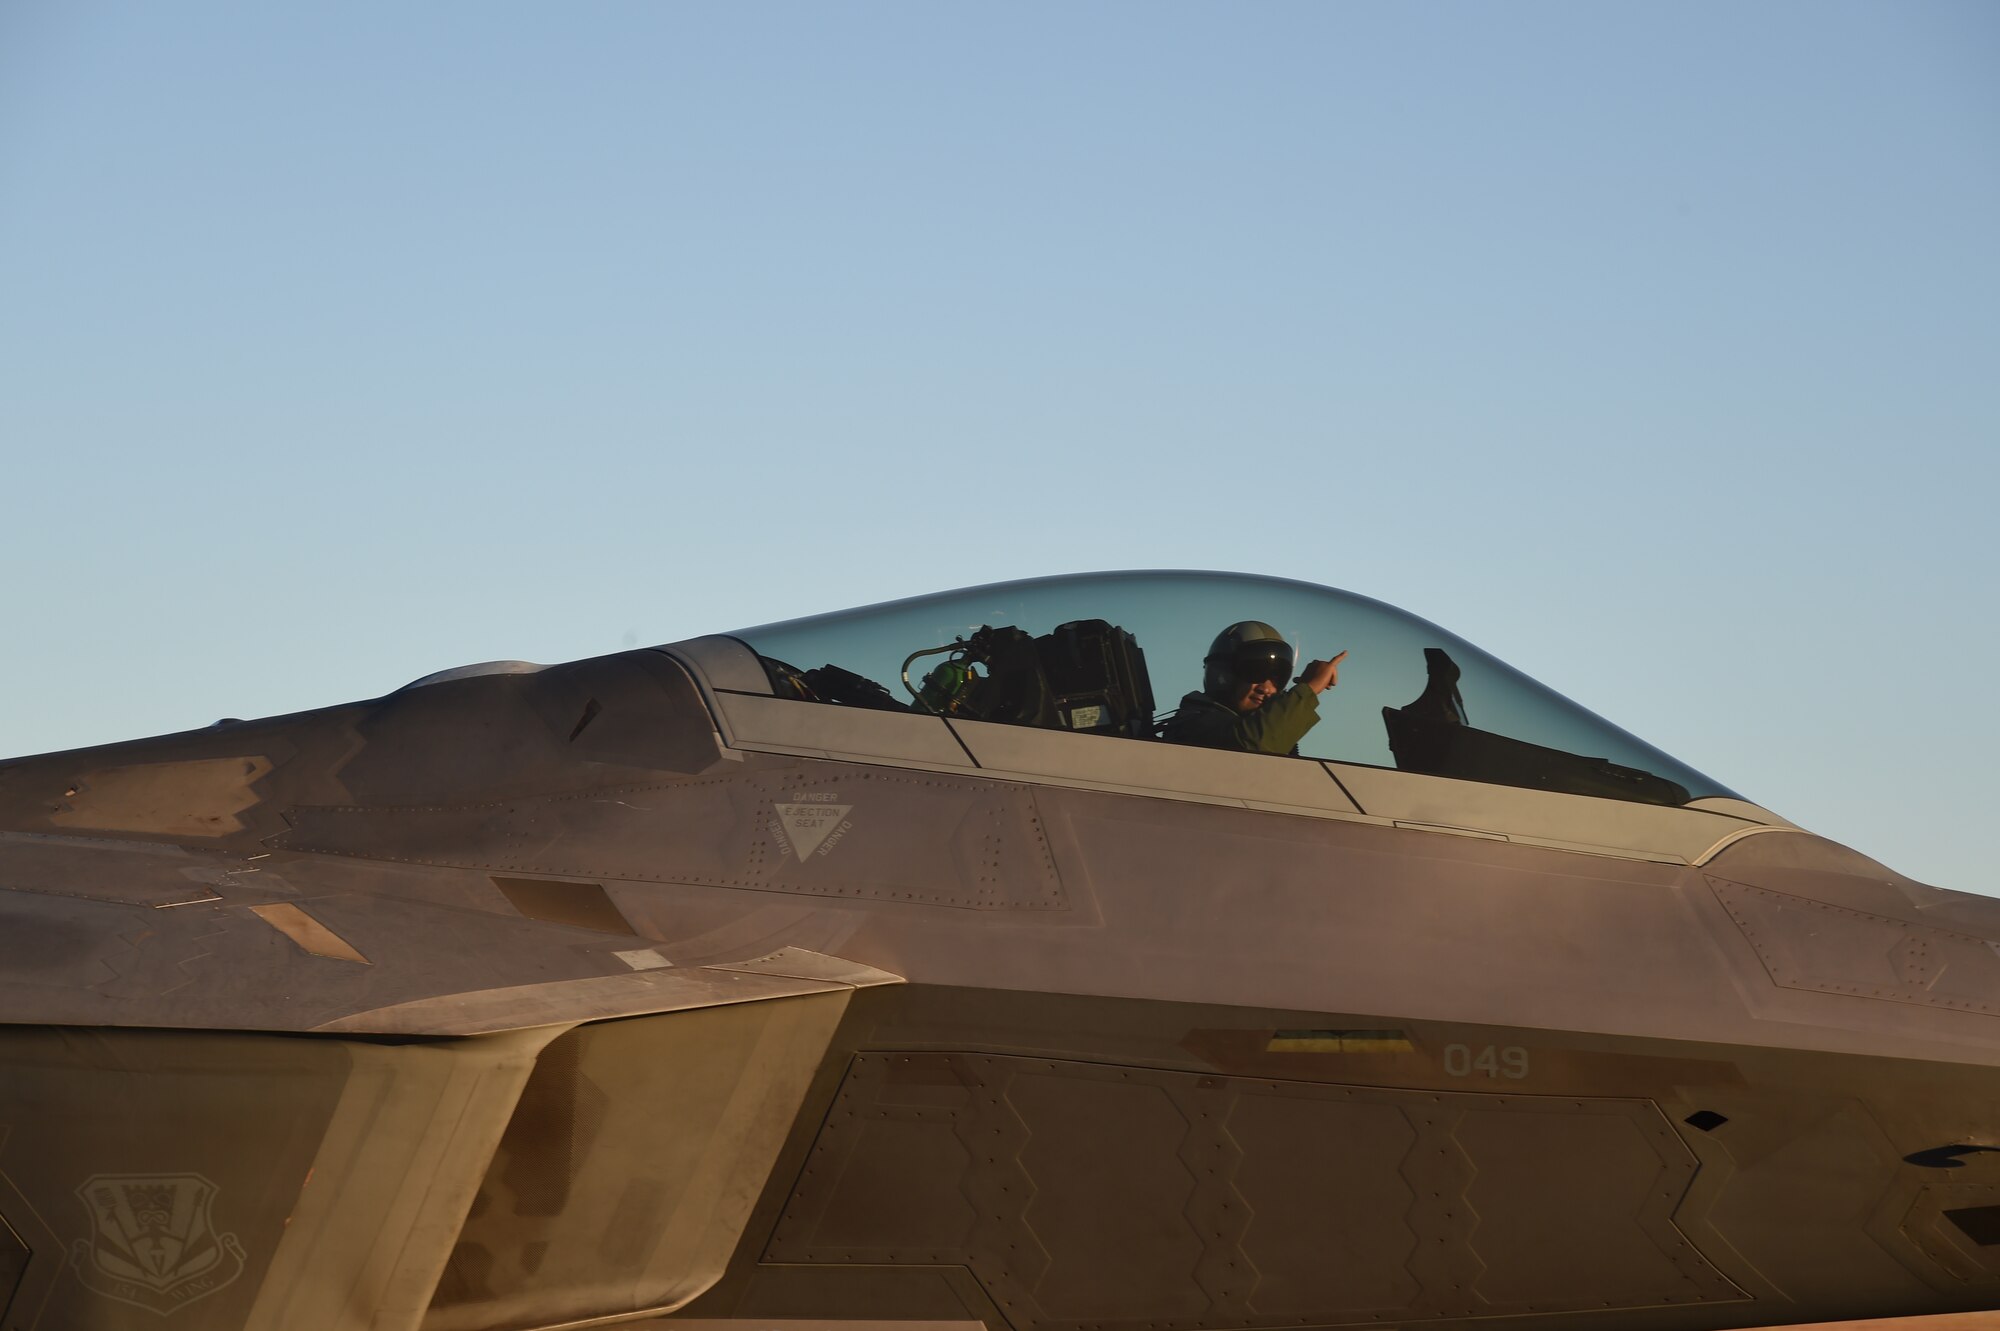 An F-22 Raptor pilot from the 19th Fighter Squadron taxies after completing an end of runway inspection on Joint Base Pearl Harbor-Hickam, Hawaii, June 6, 2015. This was the first aircraft to take off during a record breaking 62 sorties in one day by the Hawaii Air National Guard’s 199th Fighter Squadron and the 19th Fighter Squadron. (U.S. Air Force photo by Tech. Sgt. Aaron Oelrich/Released) 